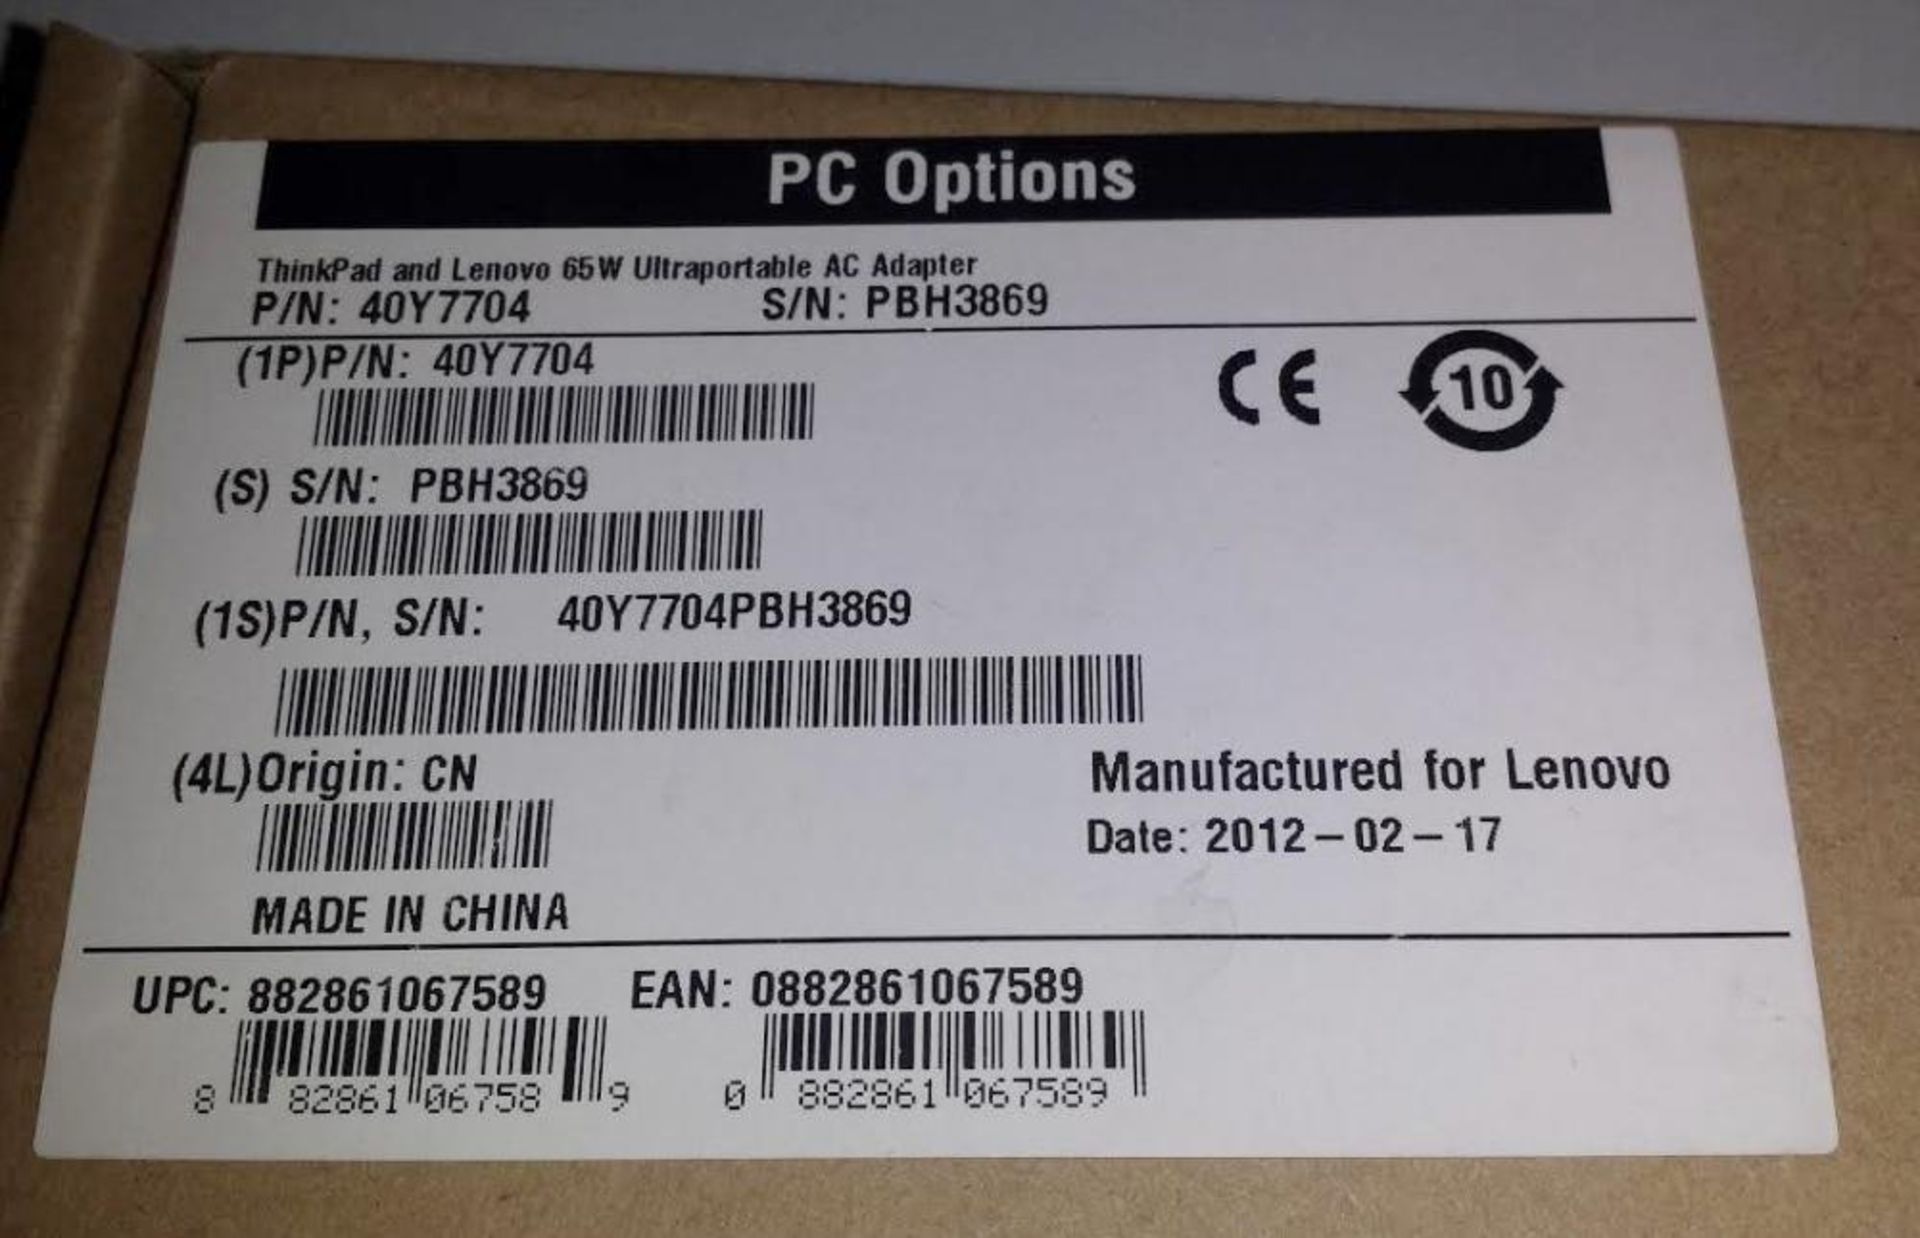 1 x ThinkPad and Lenovo 65W Ultraportable AC Laptop Adapter - New in Box - CL400 - Ref JP1035 - Loca - Image 2 of 3